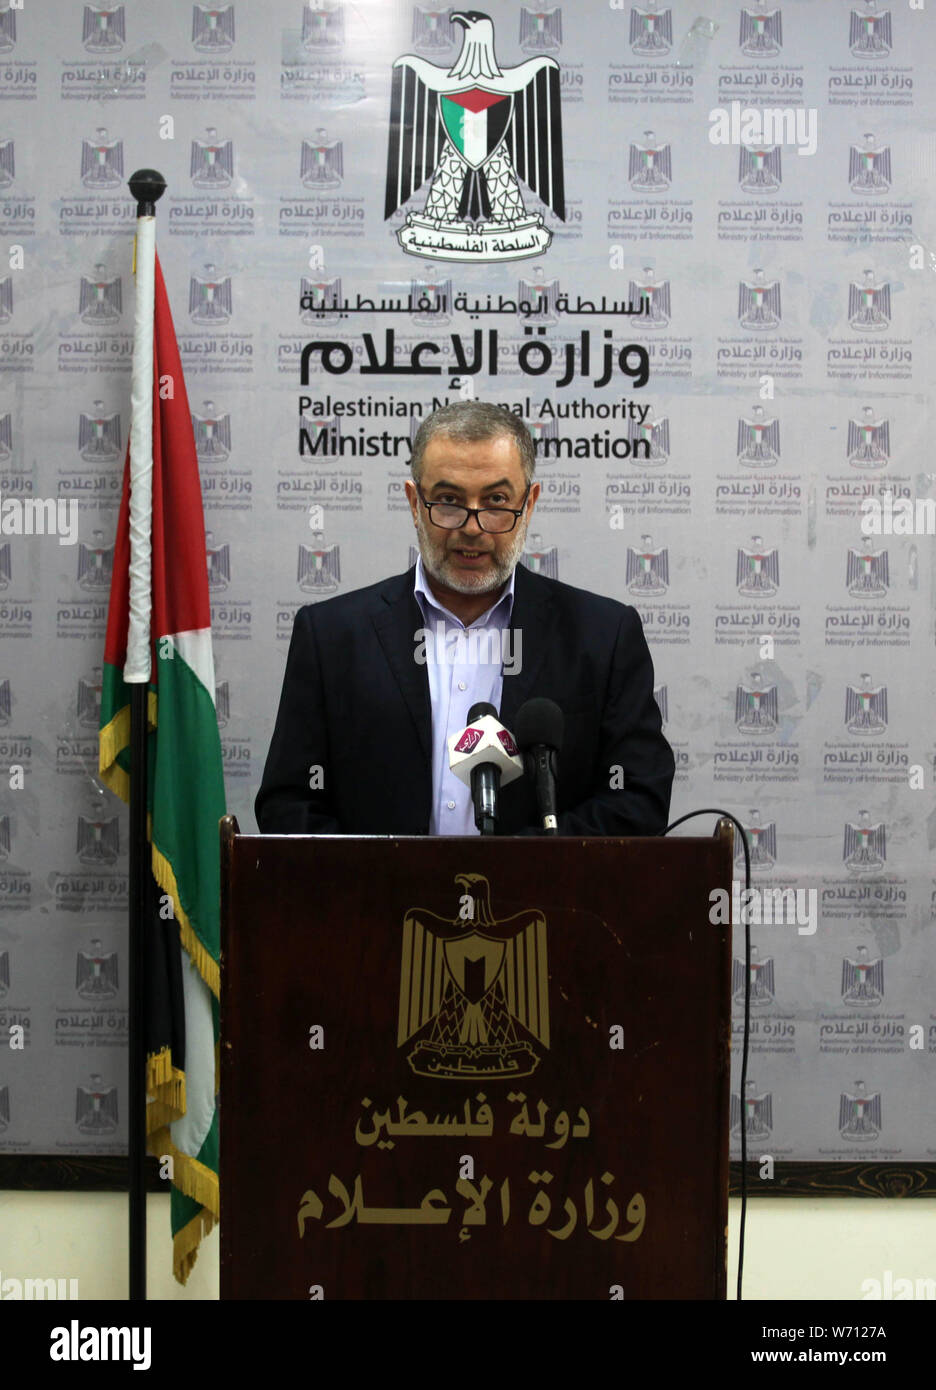 Gaza City, Gaza Strip, Palestinian Territory. 4th Aug, 2019. Deputy Undersecretary of the Ministry of Awqaf and Religious Affairs, Shukri Al-Taweel, speaks during a press conference about the Hajj season 2019, in Gaza City, on August 4, 2019 Credit: Mahmoud Ajjour/APA Images/ZUMA Wire/Alamy Live News Stock Photo